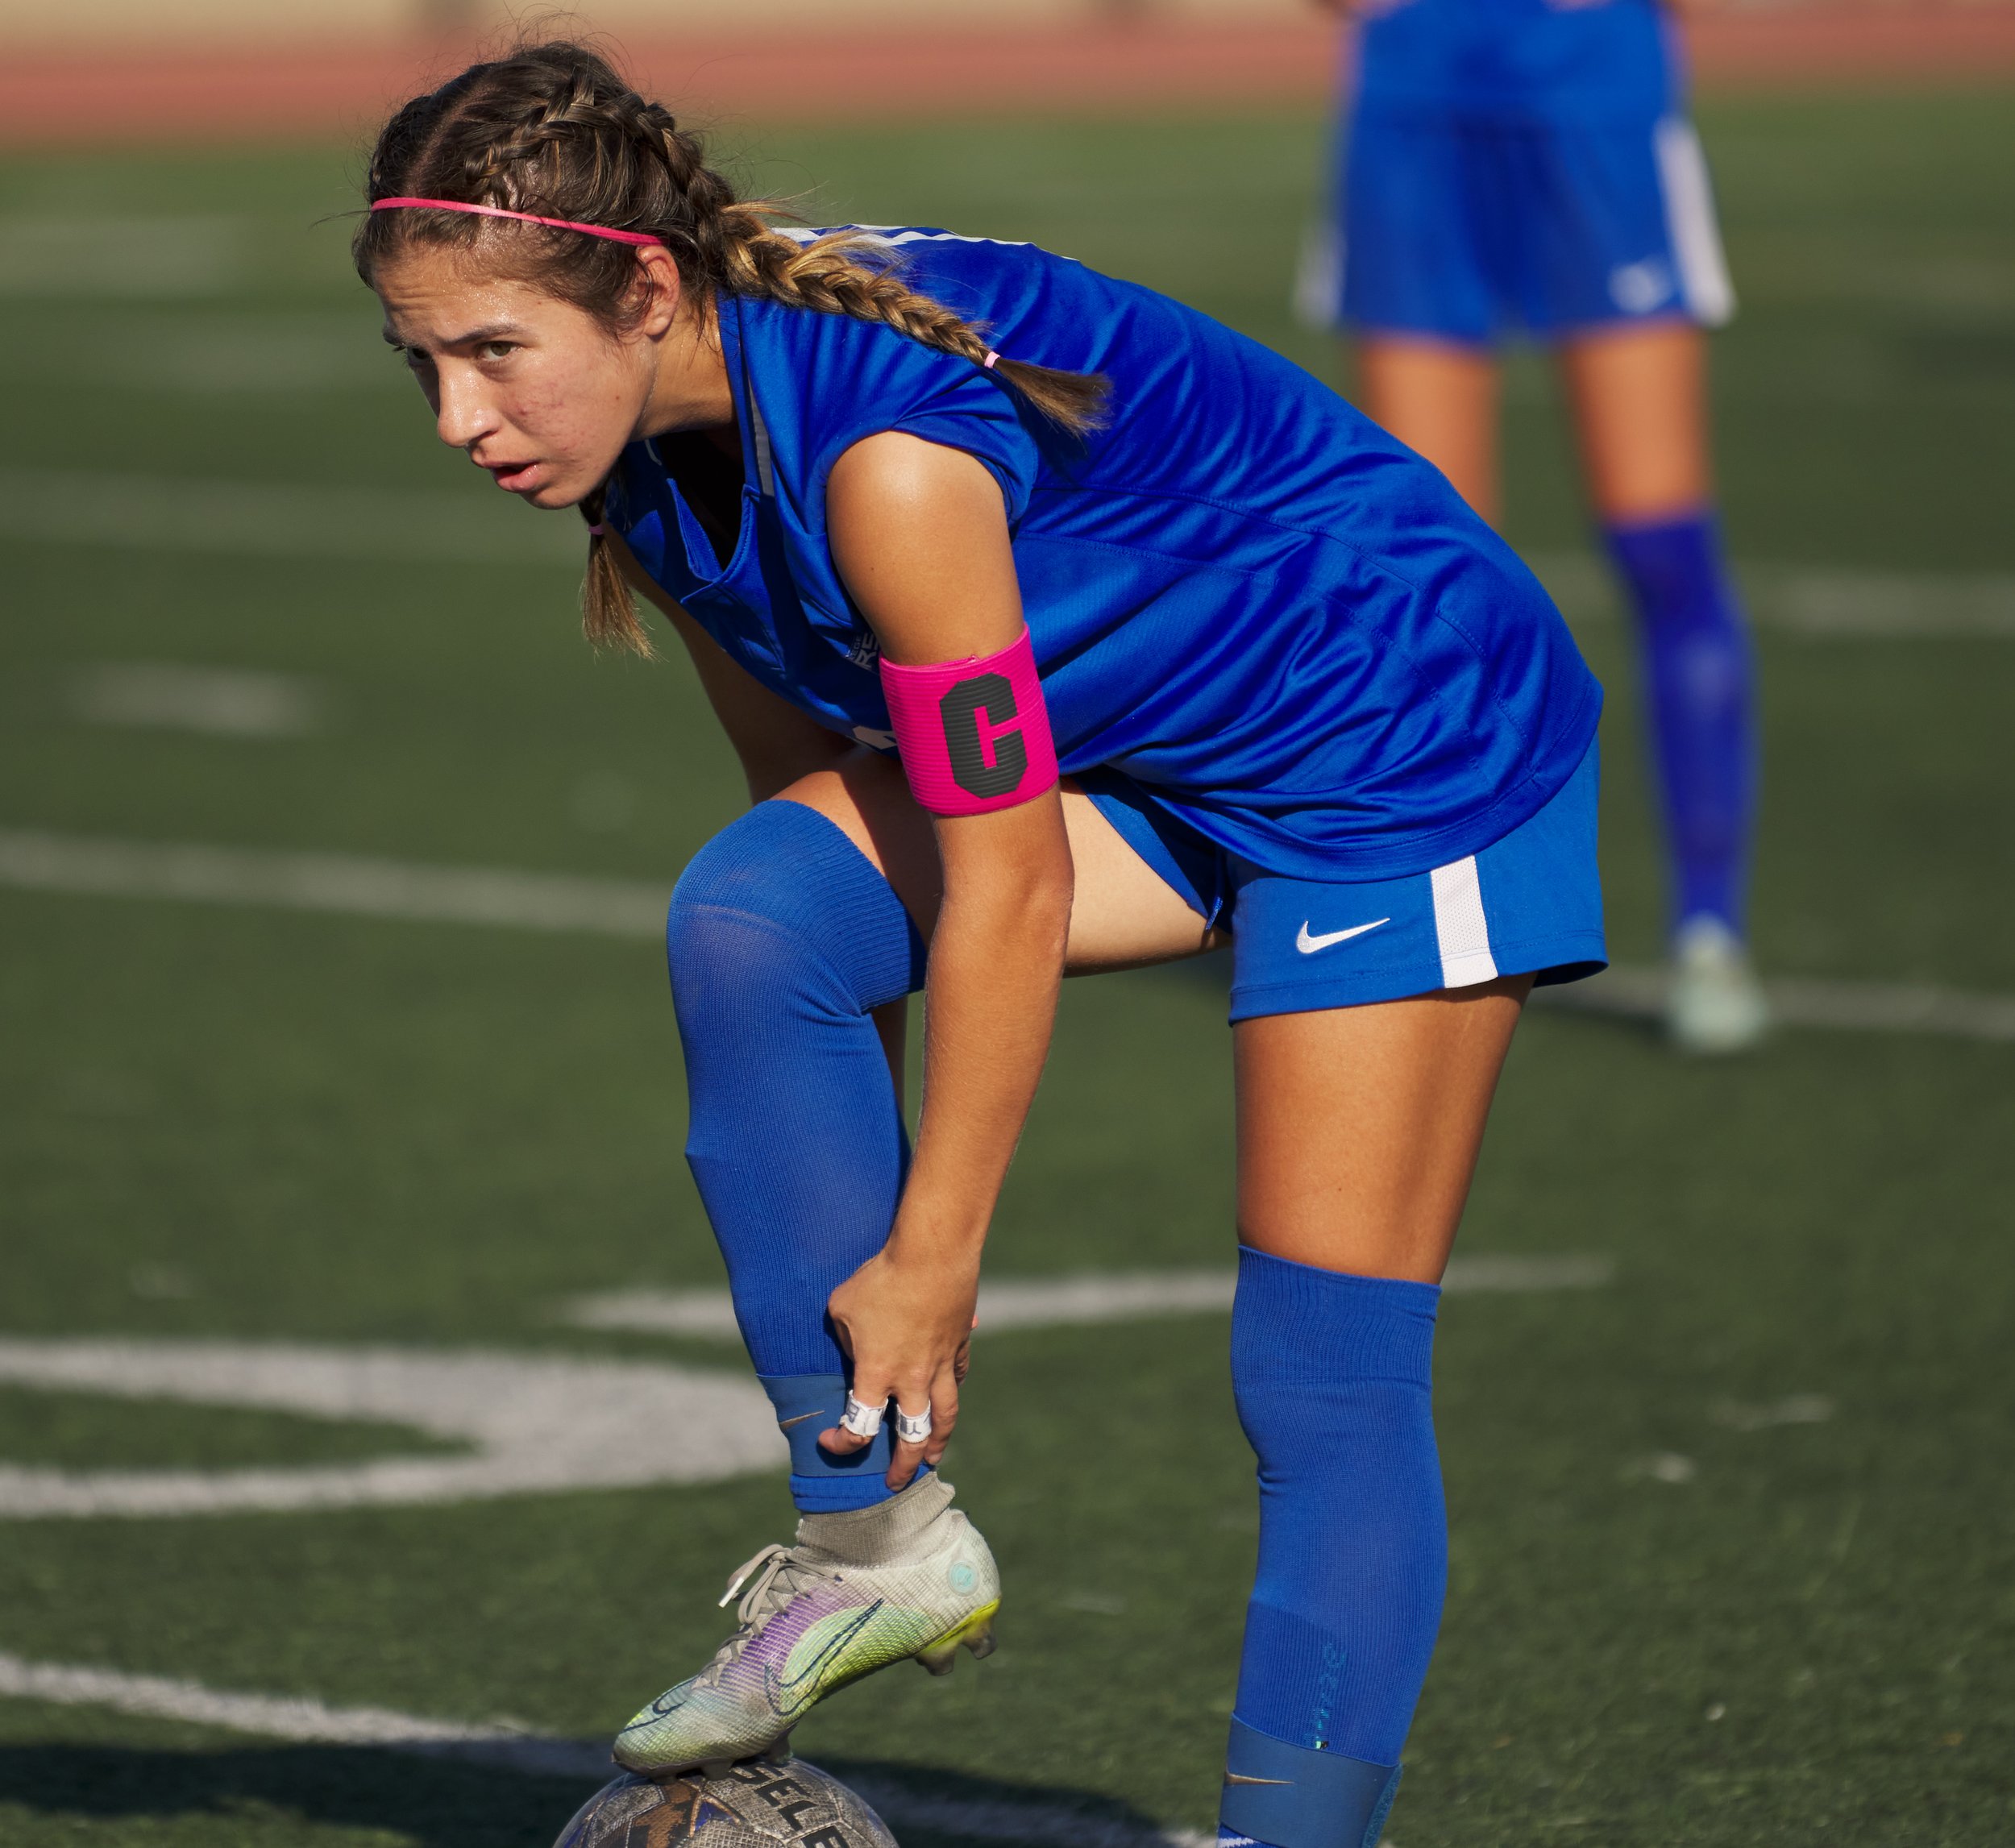  Santa Monica College Corsairs' Sophie Doumitt at the women's soccer match against the West Los Angeles College Wildcats on Friday, Sept. 30, 2022, at Corsair Field in Santa Monica, Calif. The Corsairs won 3-2. (Nicholas McCall | The Corsair) 